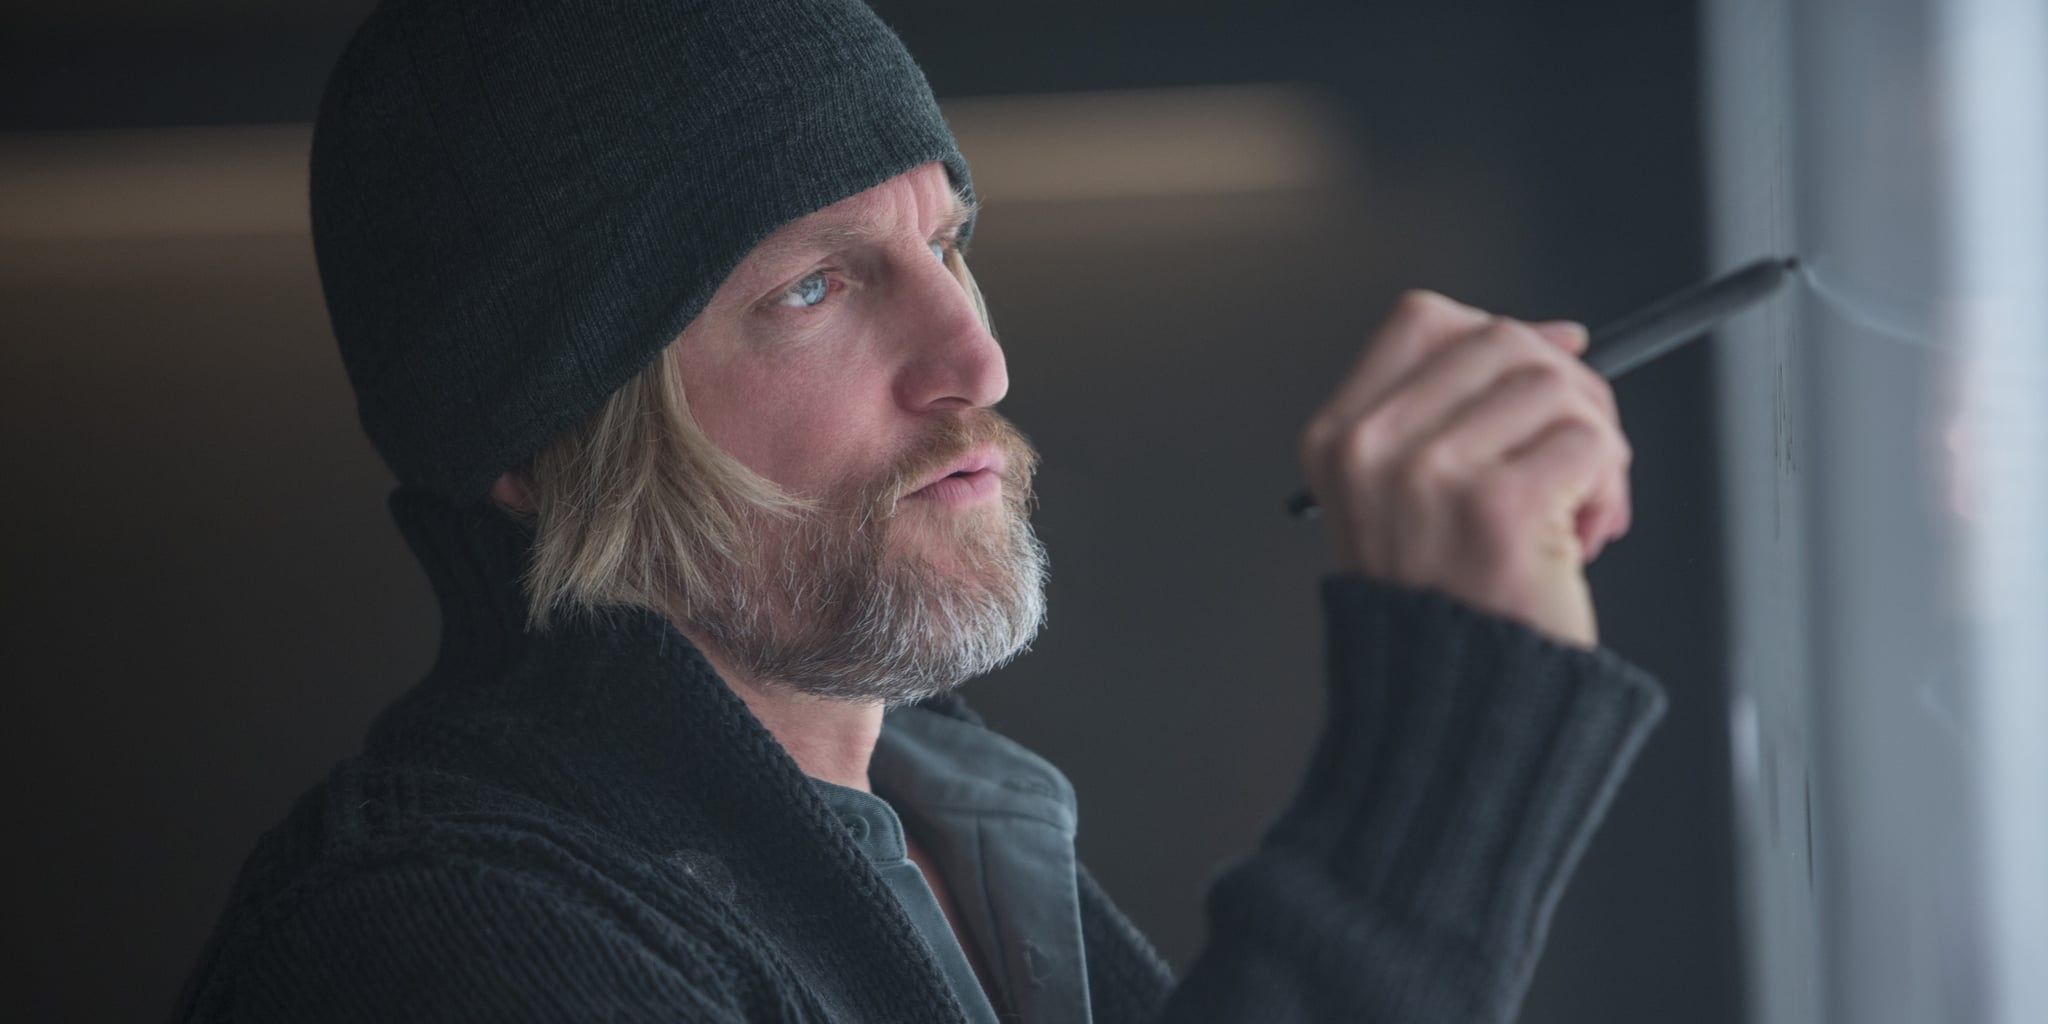 Haymitch writes on a board in Hunger Games